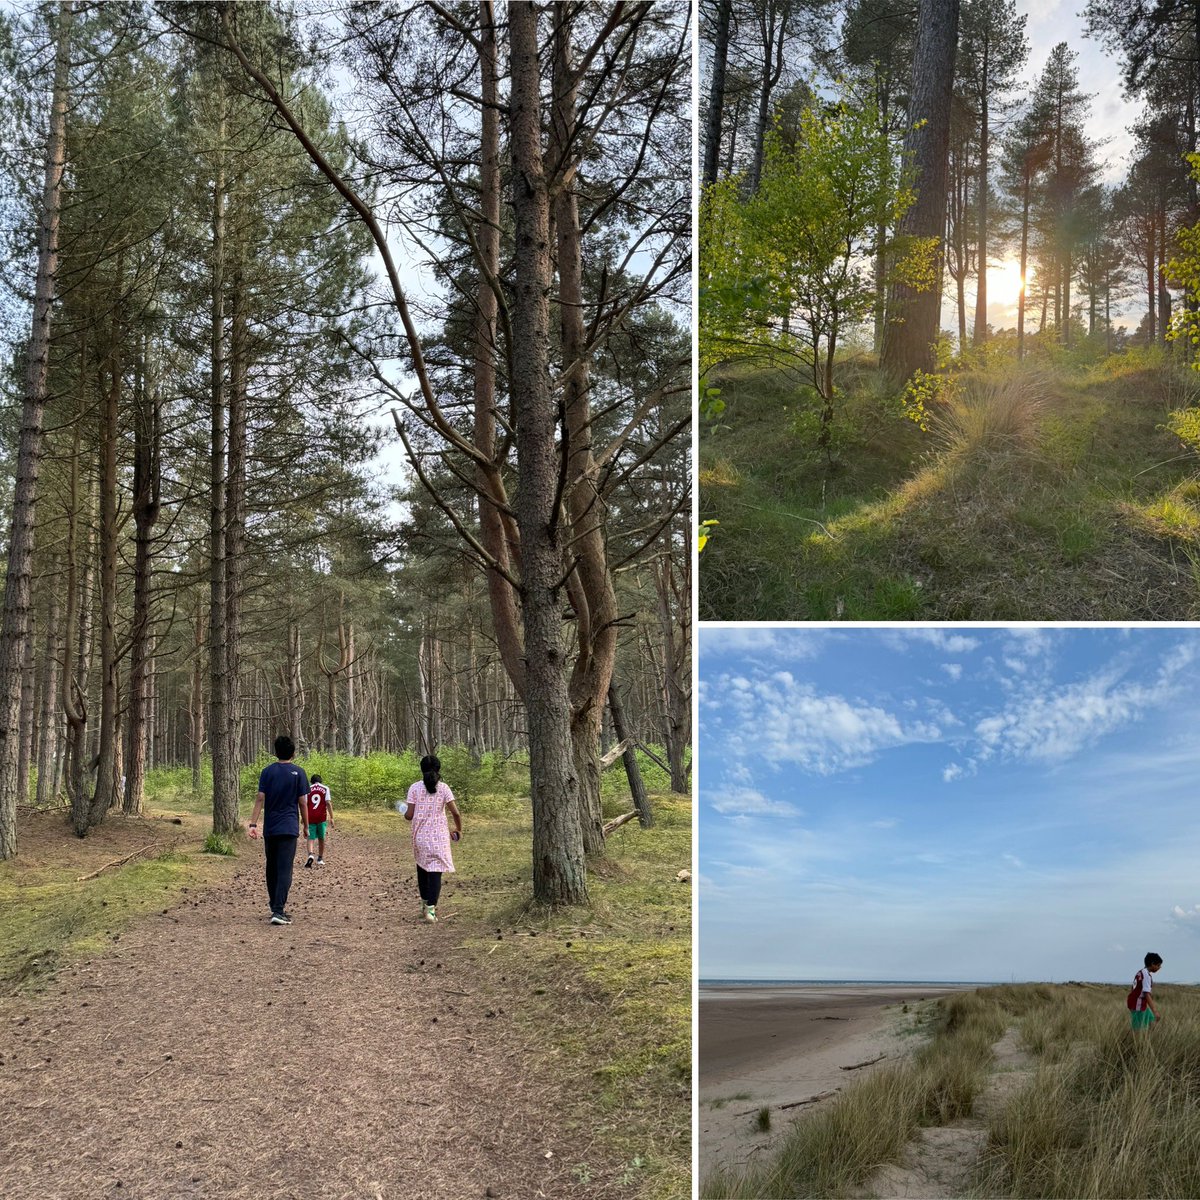 Beautiful #tentsmuir #forest and beach for a family walk and some #forestbathing🌲🌳yesterday. It was such a beautiful day. We are so lucky to have these wonderful spaces near us. 💚 #shinrinyoku #mindfullness #nature @ForestryLS